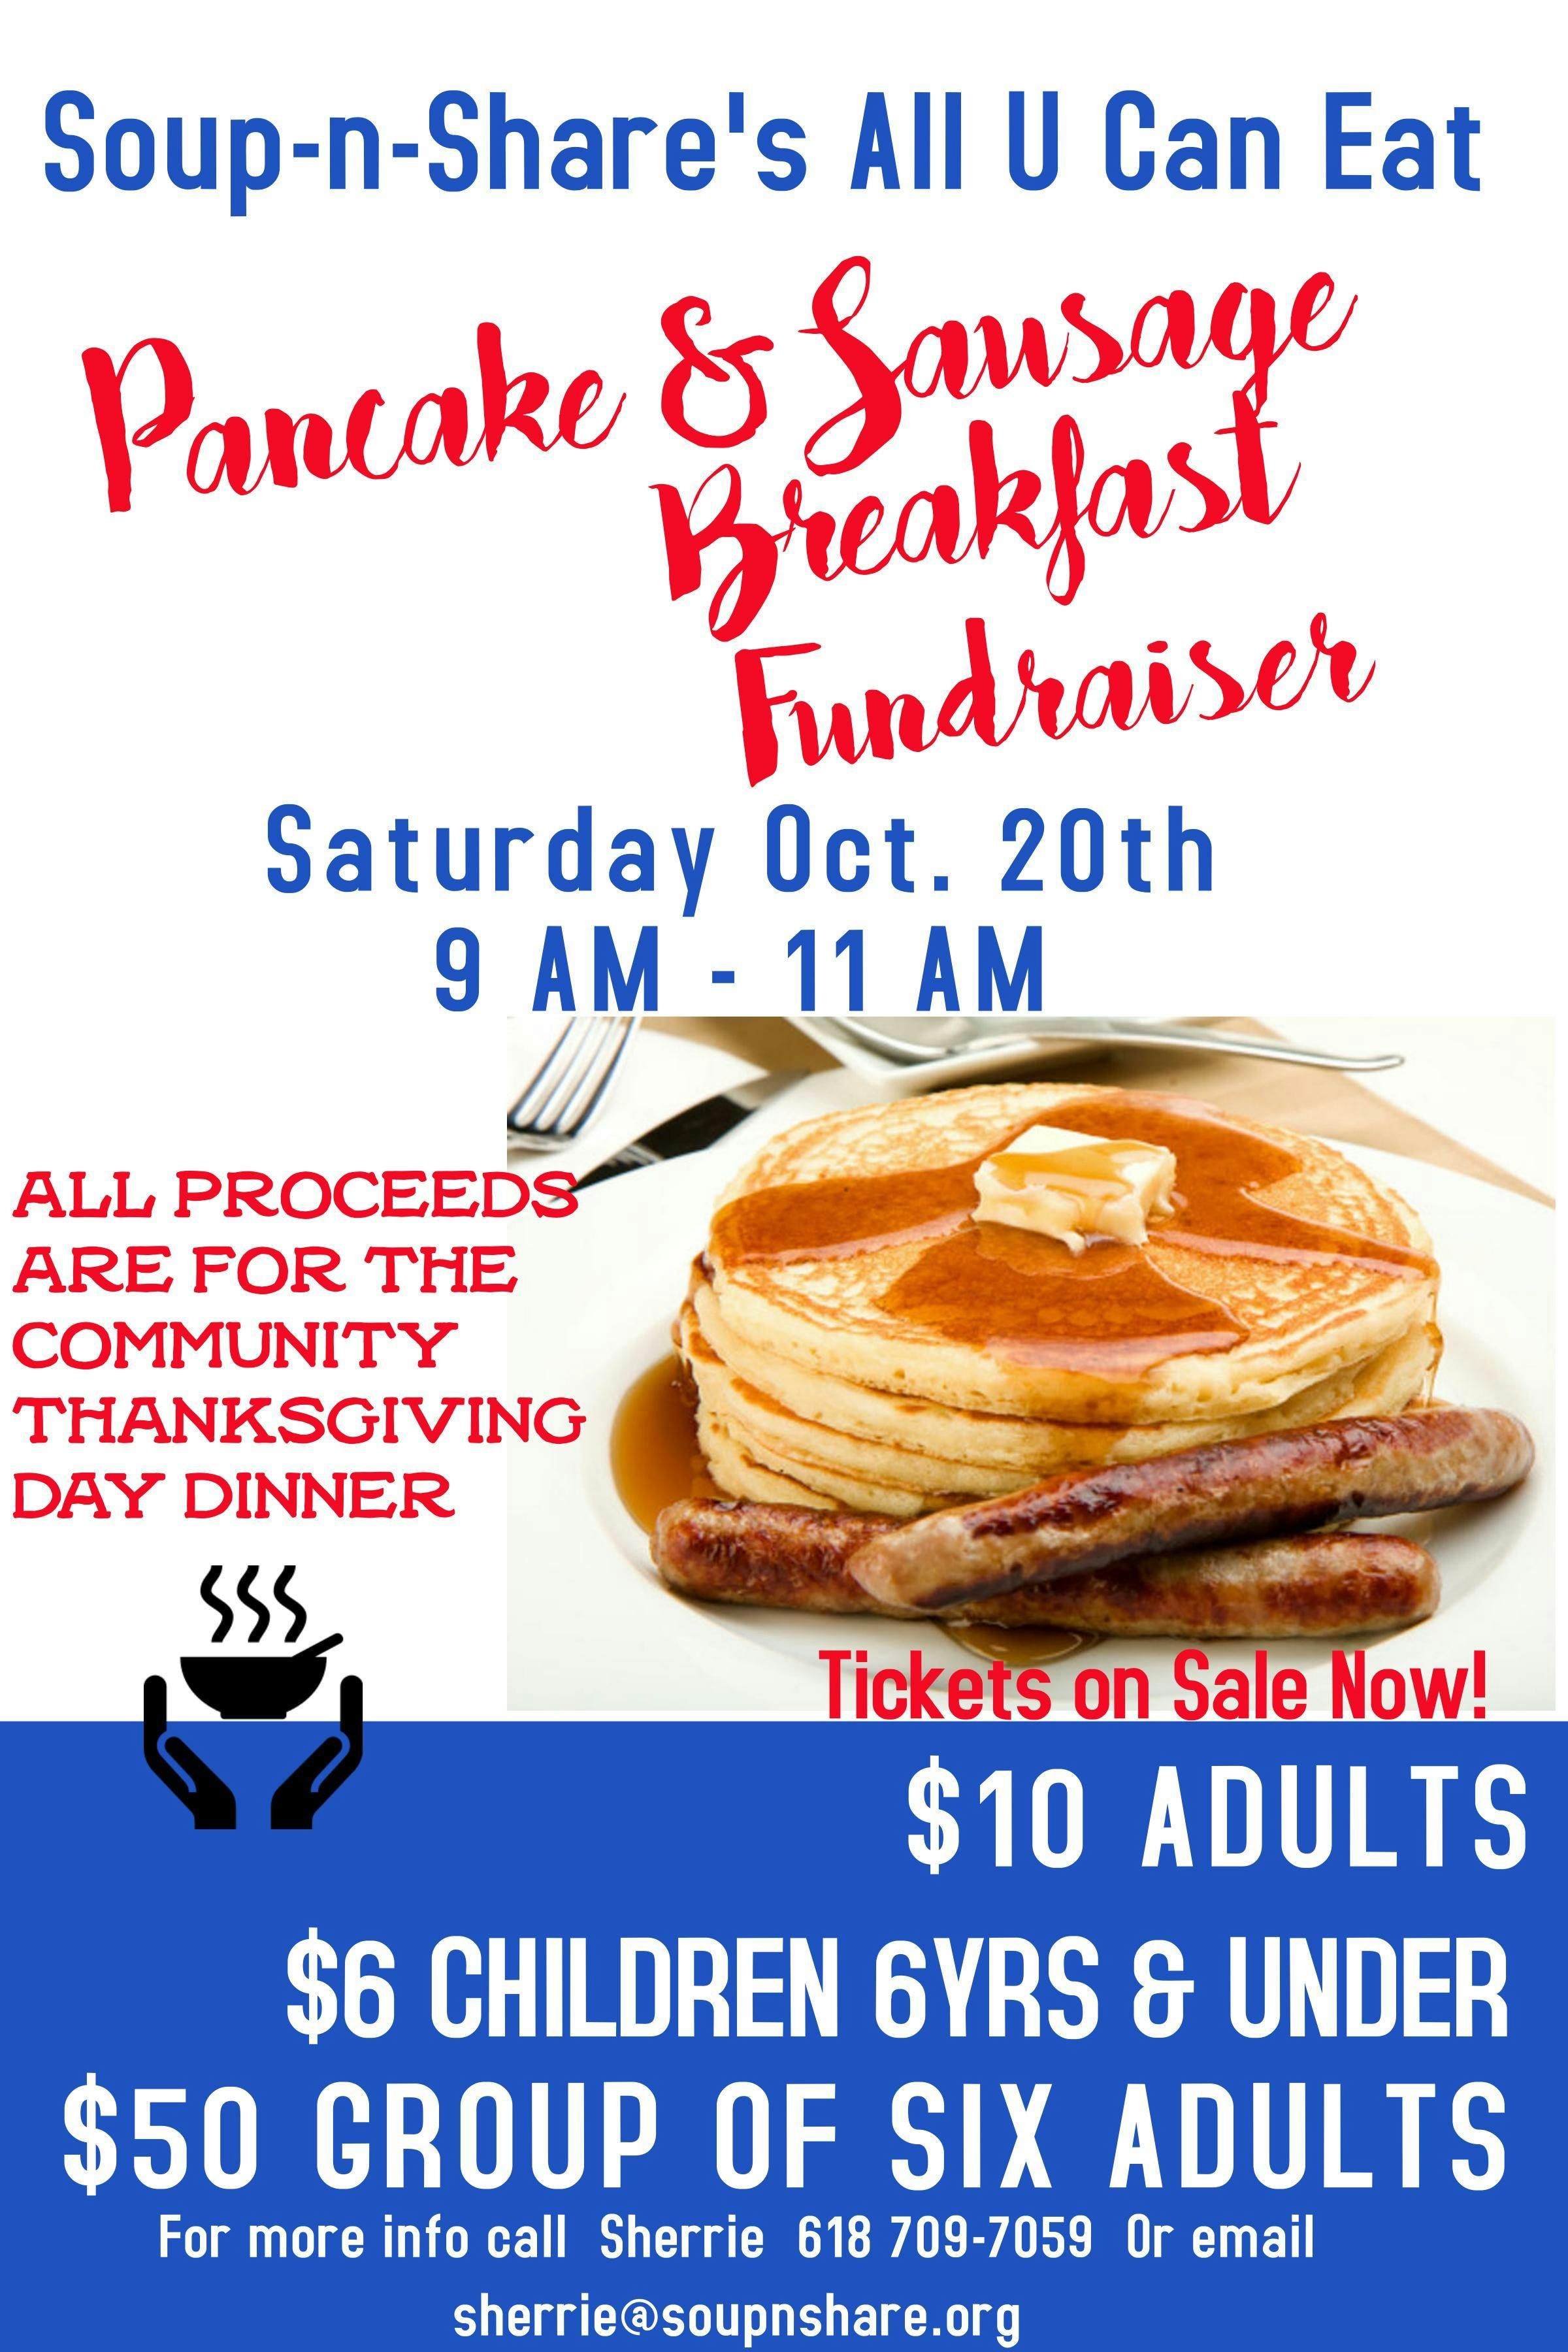 Soup-n-Share's All U Can Eat Pancake & Sausage Breakfast